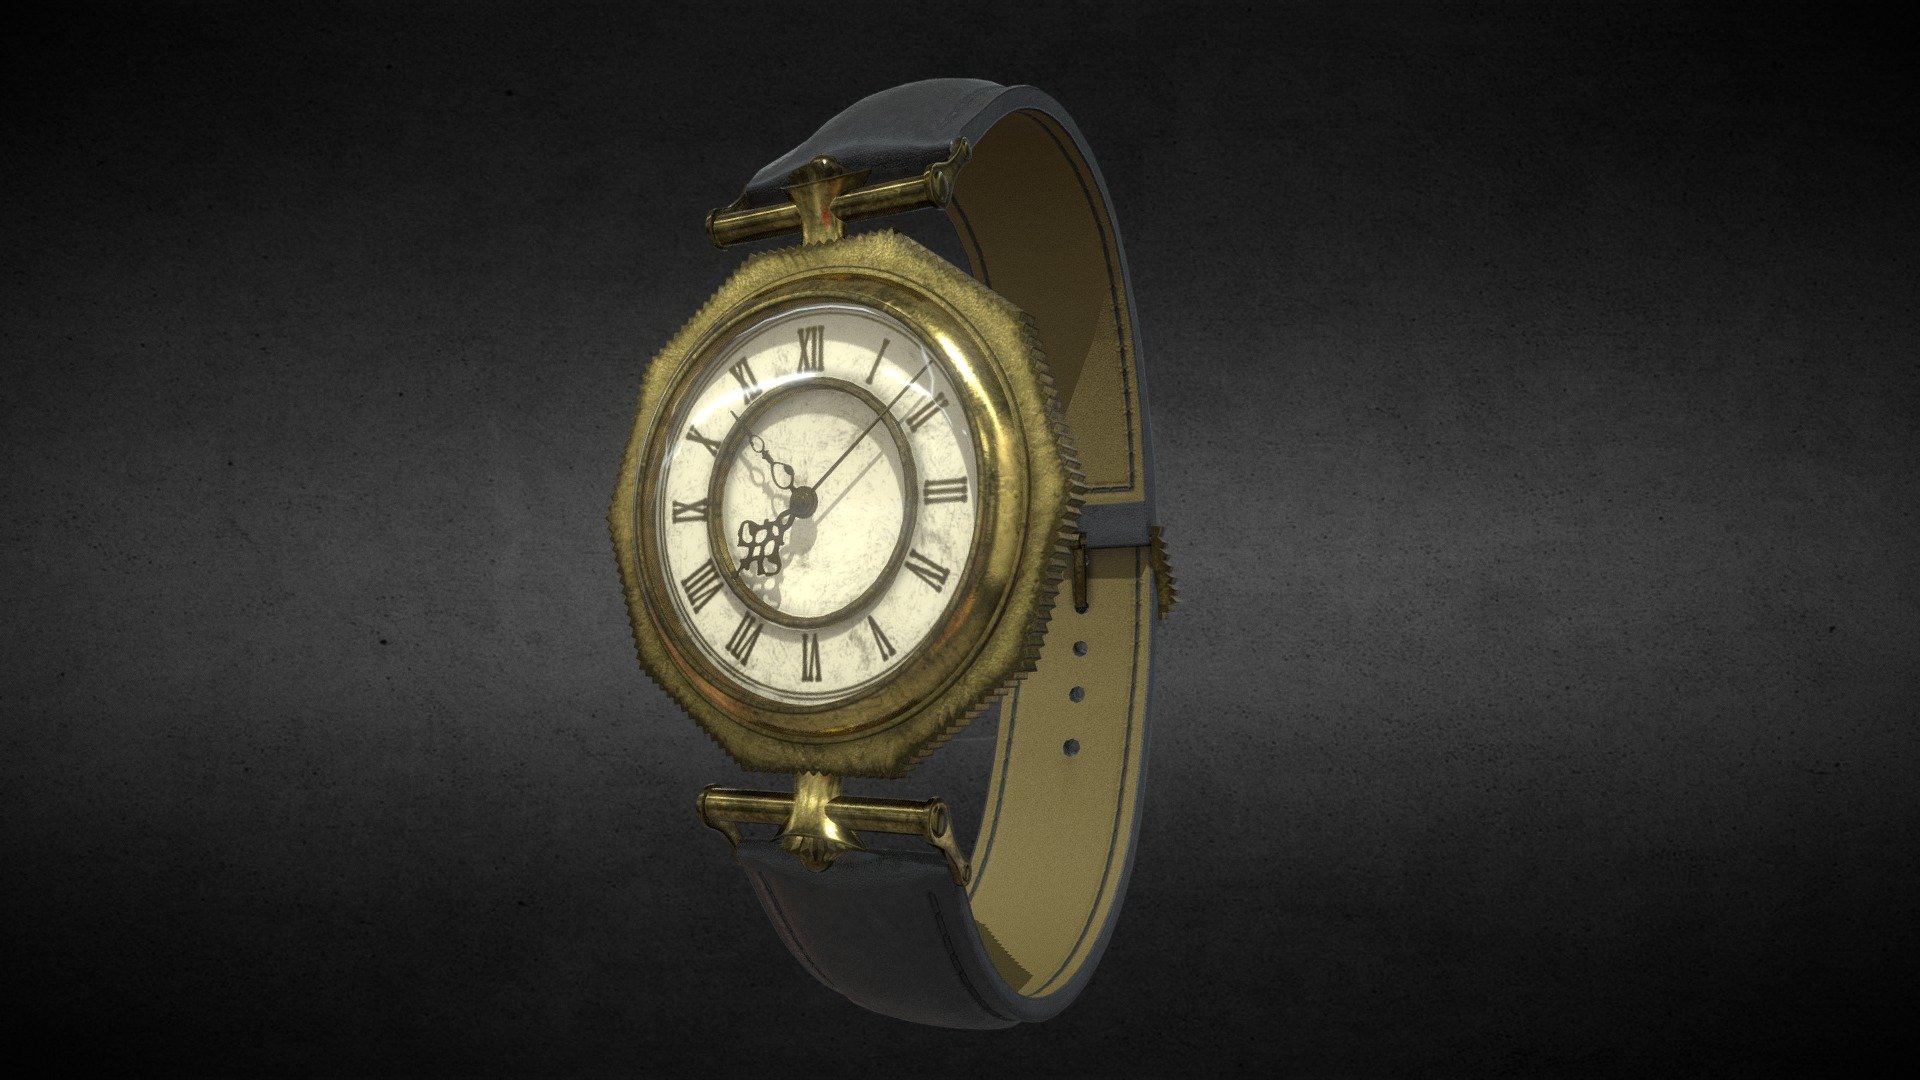 Awesome stainless steel Vintage Watch.

Currently available for download in FBX format.

3D model developed by AR-Watches 3d model